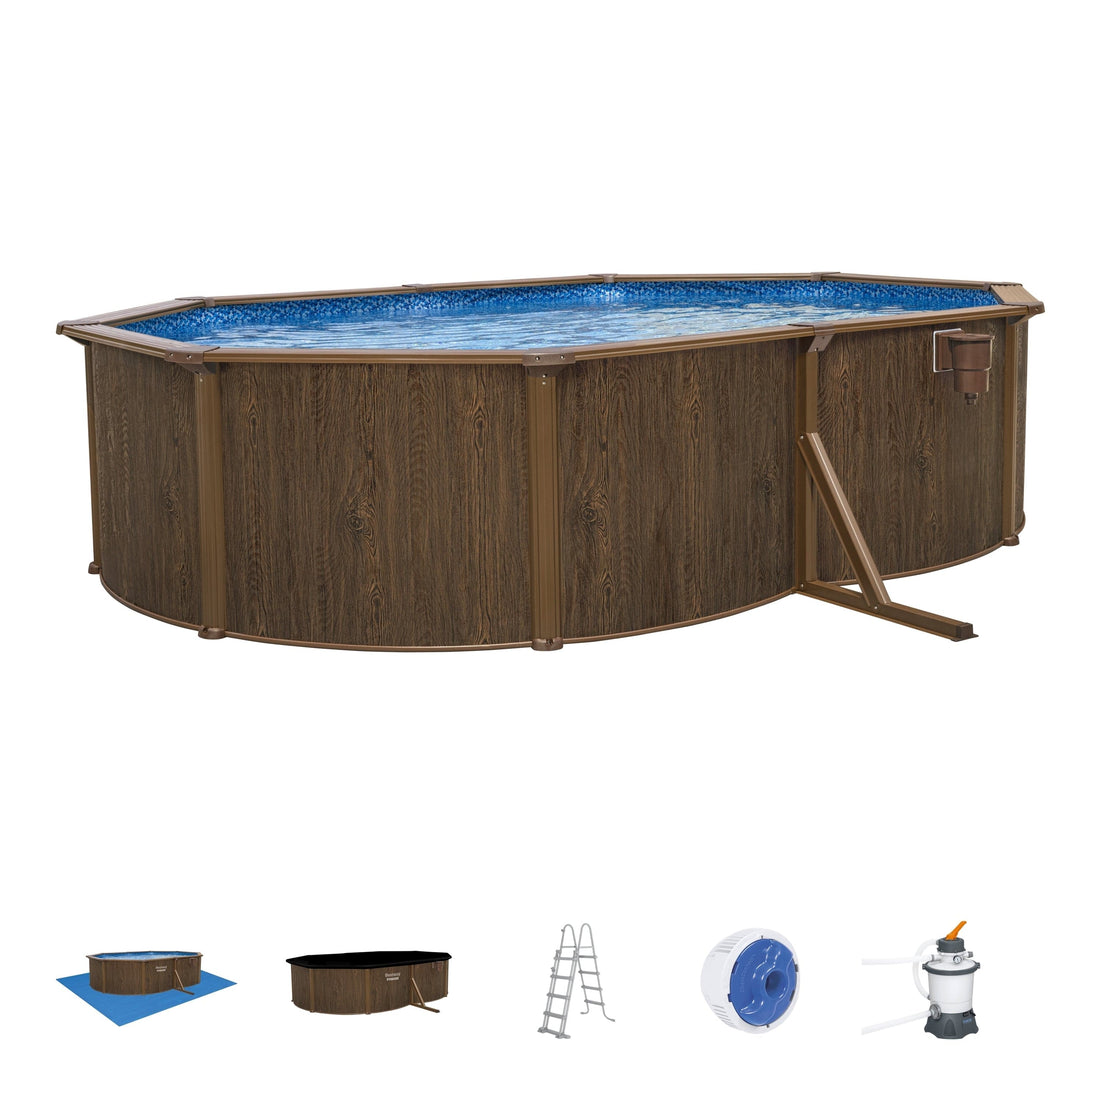 HYDRIUM POOL WOOD OVAL 5X3,60X1,20M SAND FILTER COVER AND BASE MAT - best price from Maltashopper.com BR500015709